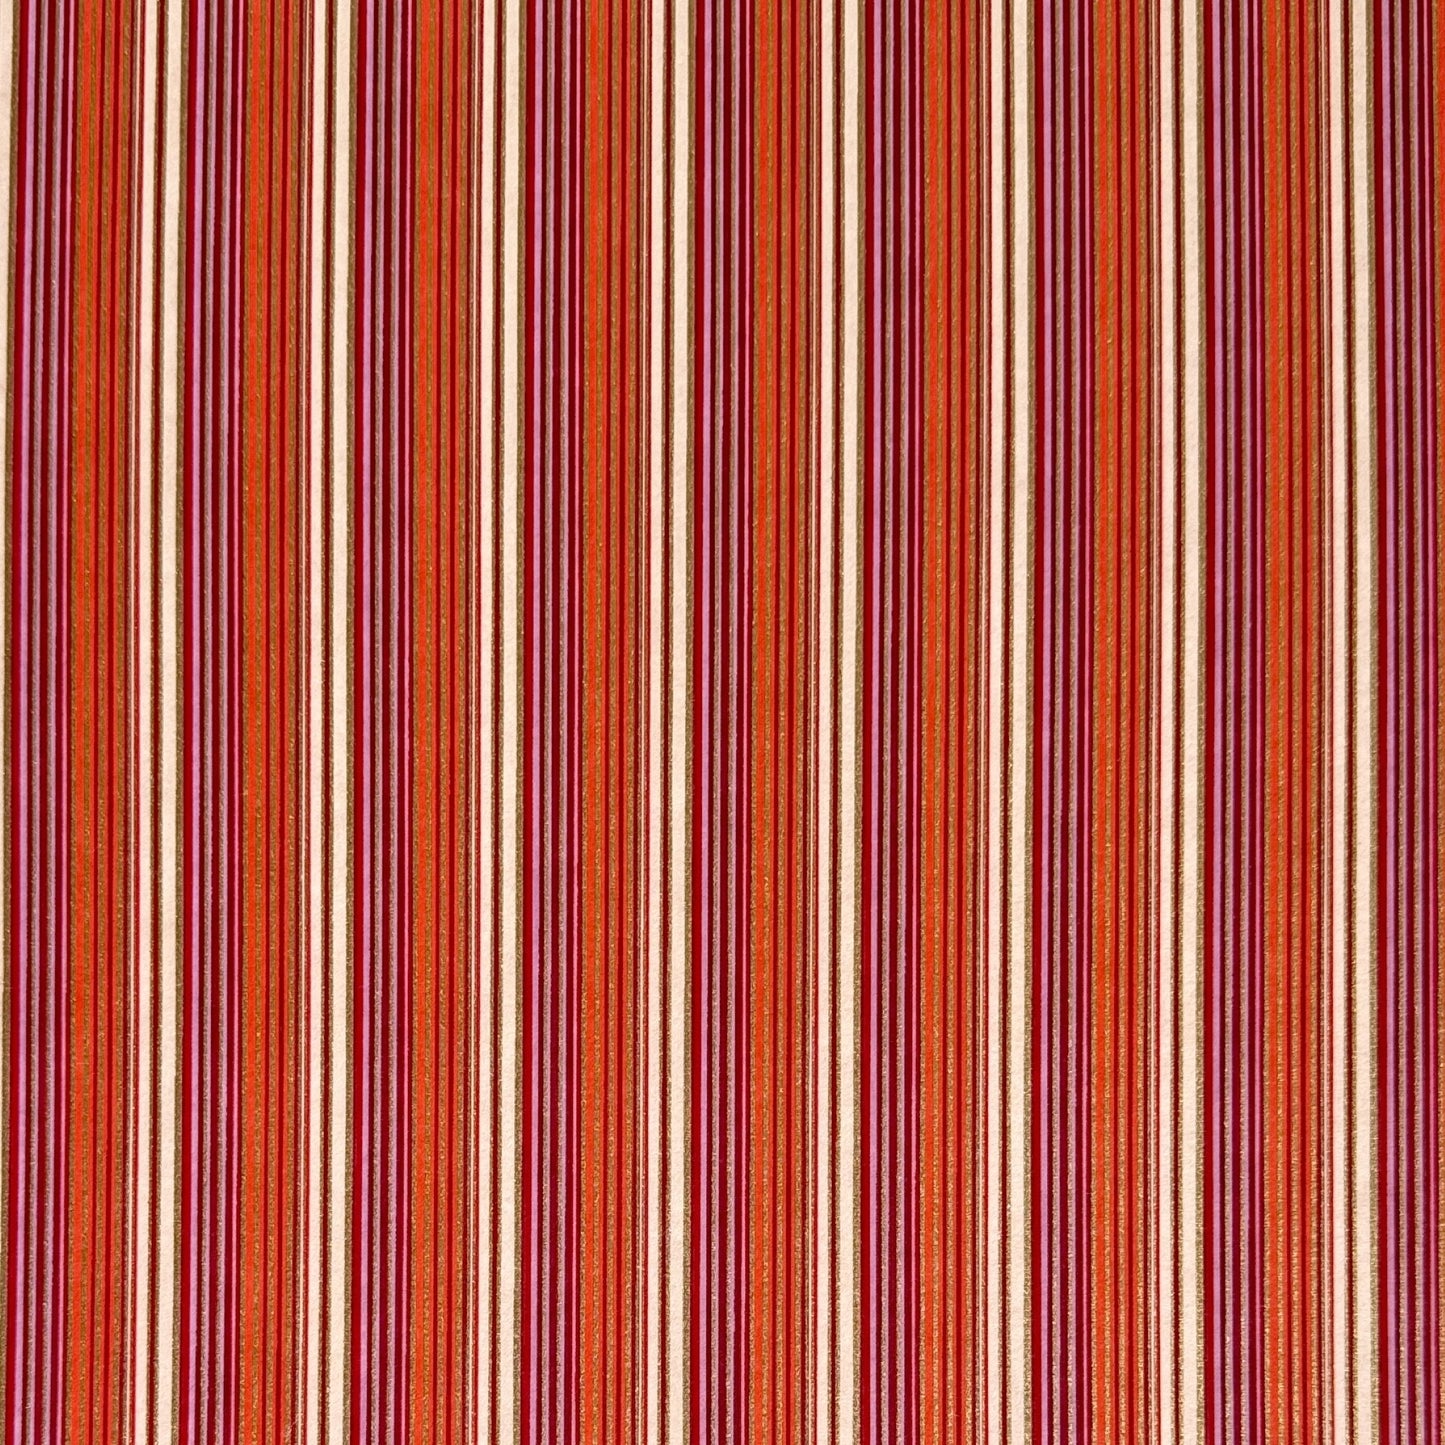 Japanese silkscreen chiyogami paper with a classic narrow stripe pattern in berry tones of red, pink, purple and gold.